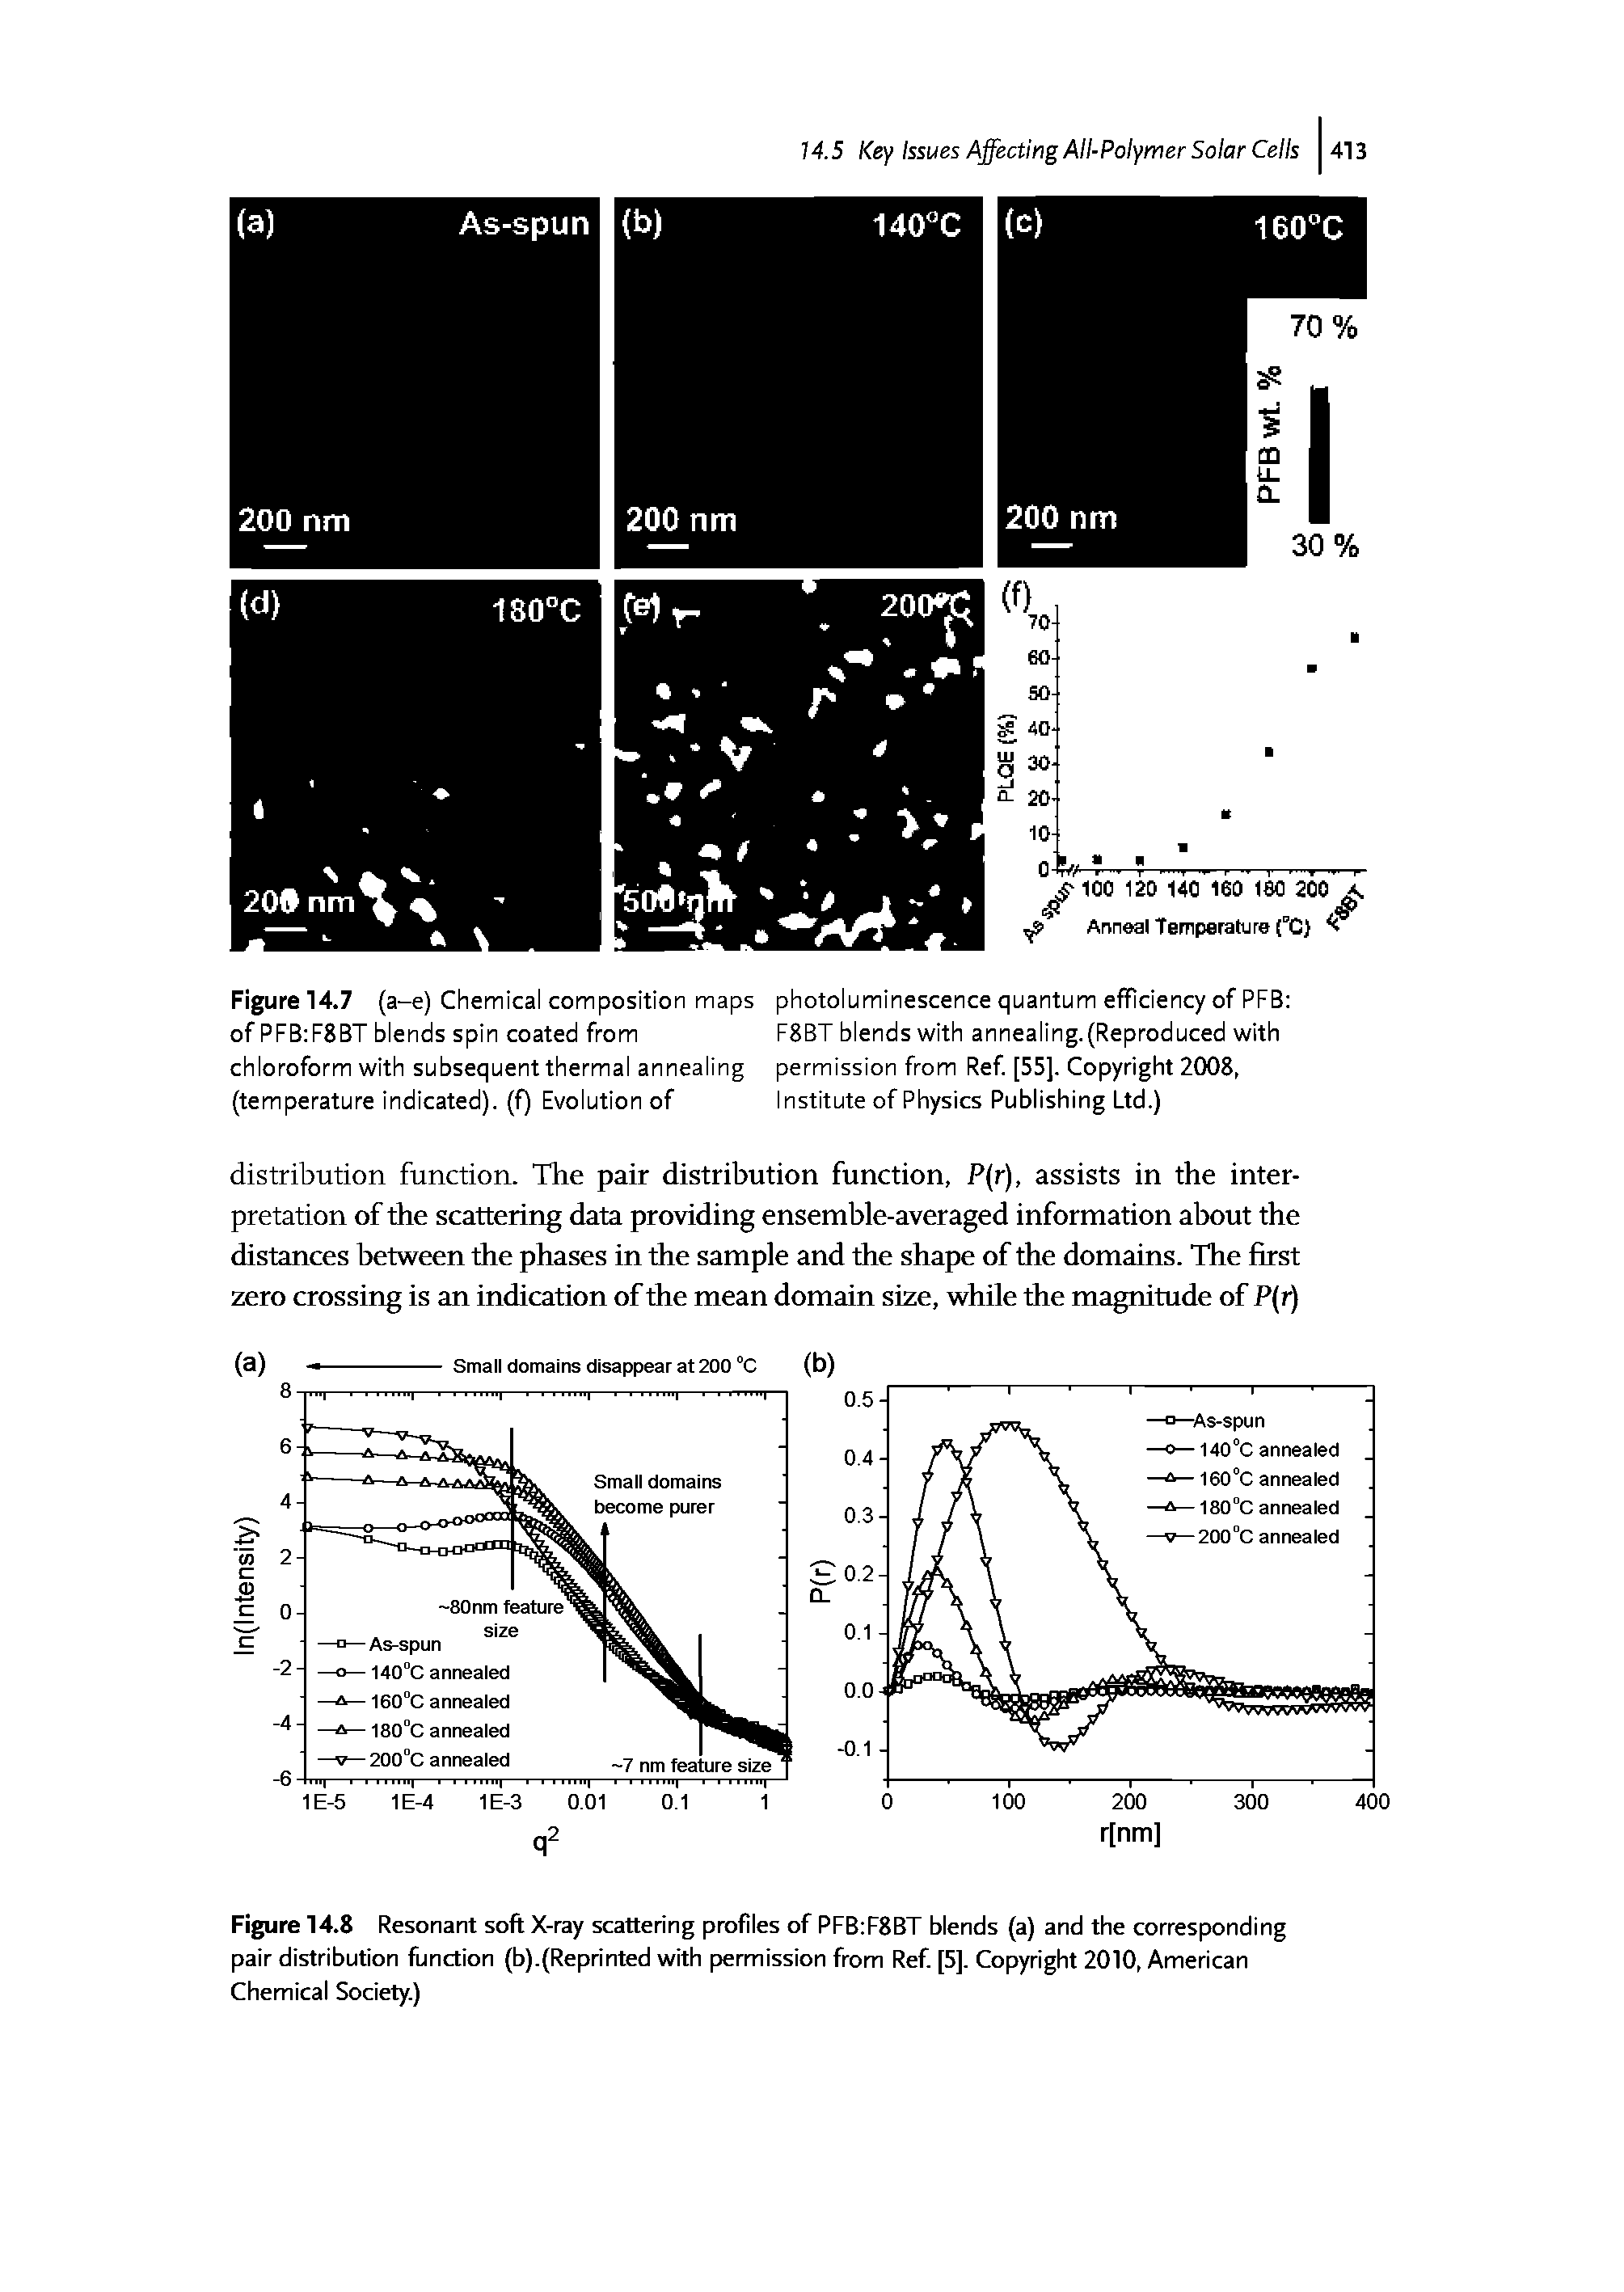 Figure 14.8 Resonant soft X-ray scattering profiles of PFB F8BT blends (a) and the corresponding pair distribution function (b).(Reprinted with permission from Ref [5]. Copyright 2010, American Chemical Society.)...